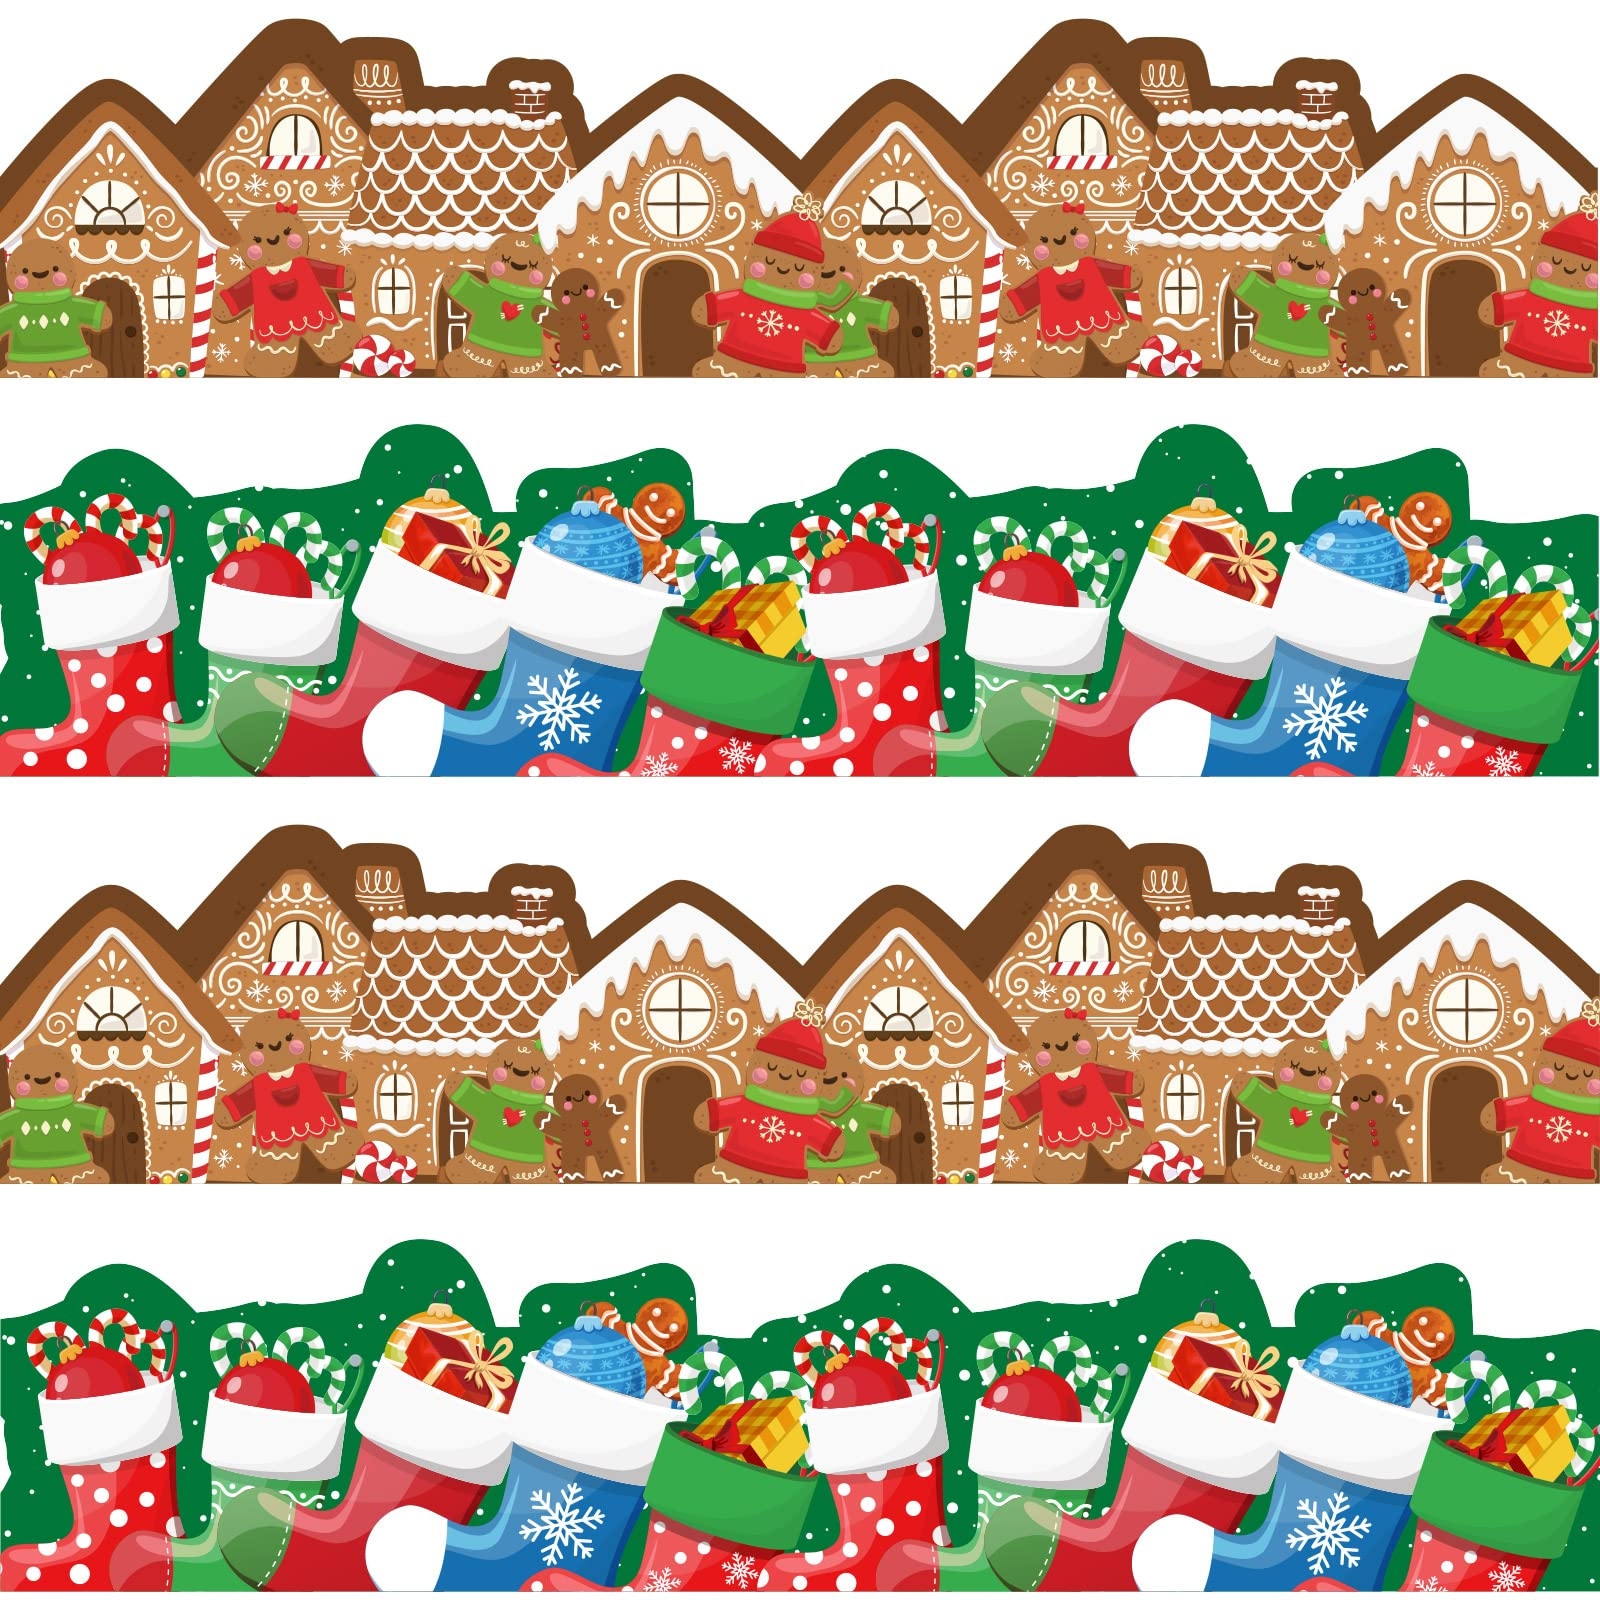 Amazon 63ft Christmas Bulletin Board Borders Gingerbread House Christmas Stocking Bulletin Board Decorations Christmas Winter Border Paper Holiday Borders Border For School Classroom Office Party Wall Decor Office Products